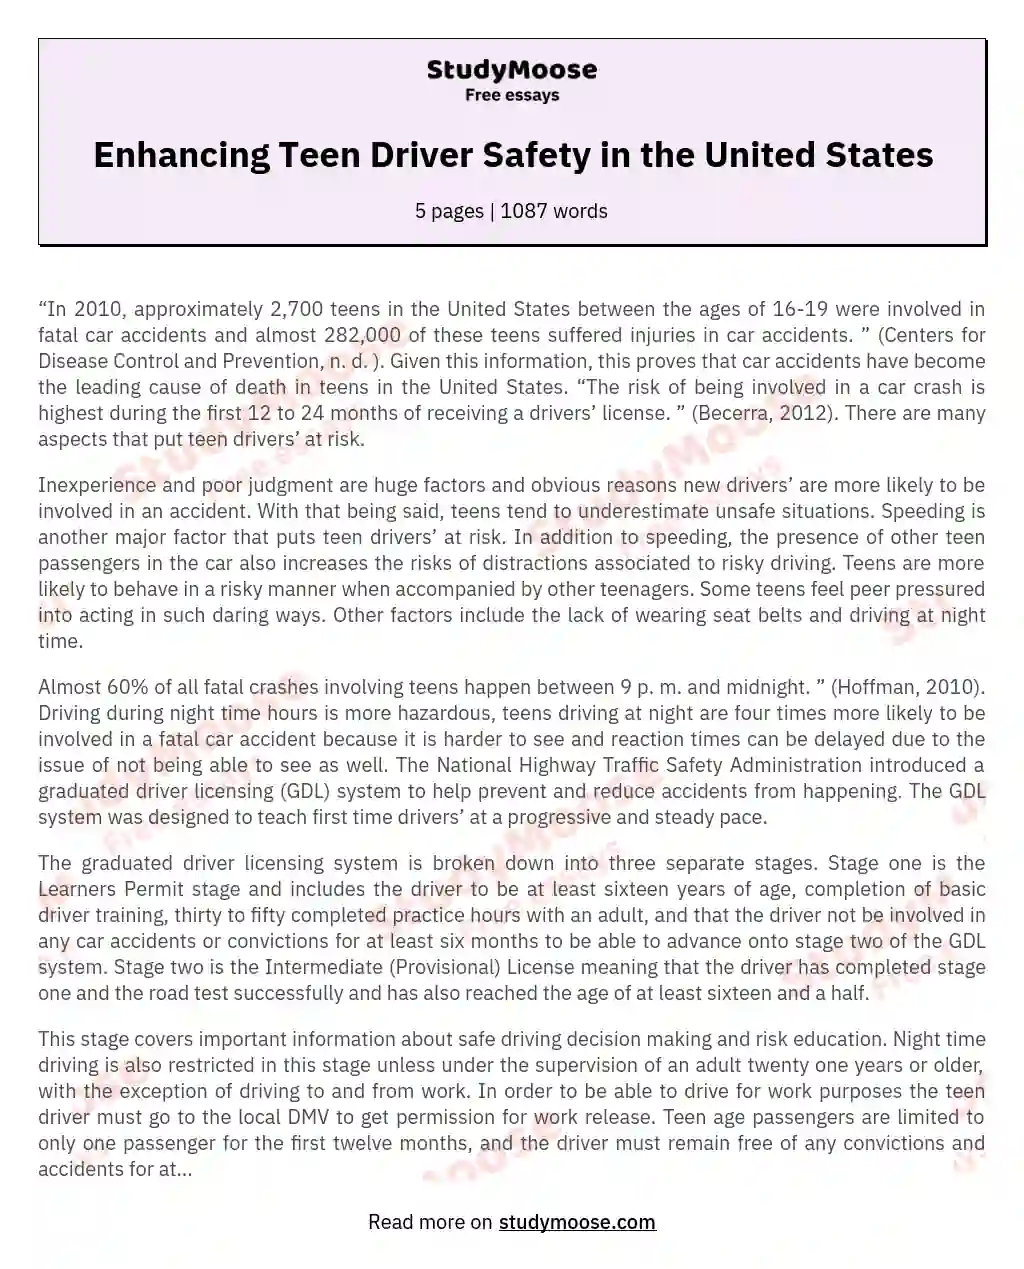 Enhancing Teen Driver Safety in the United States essay